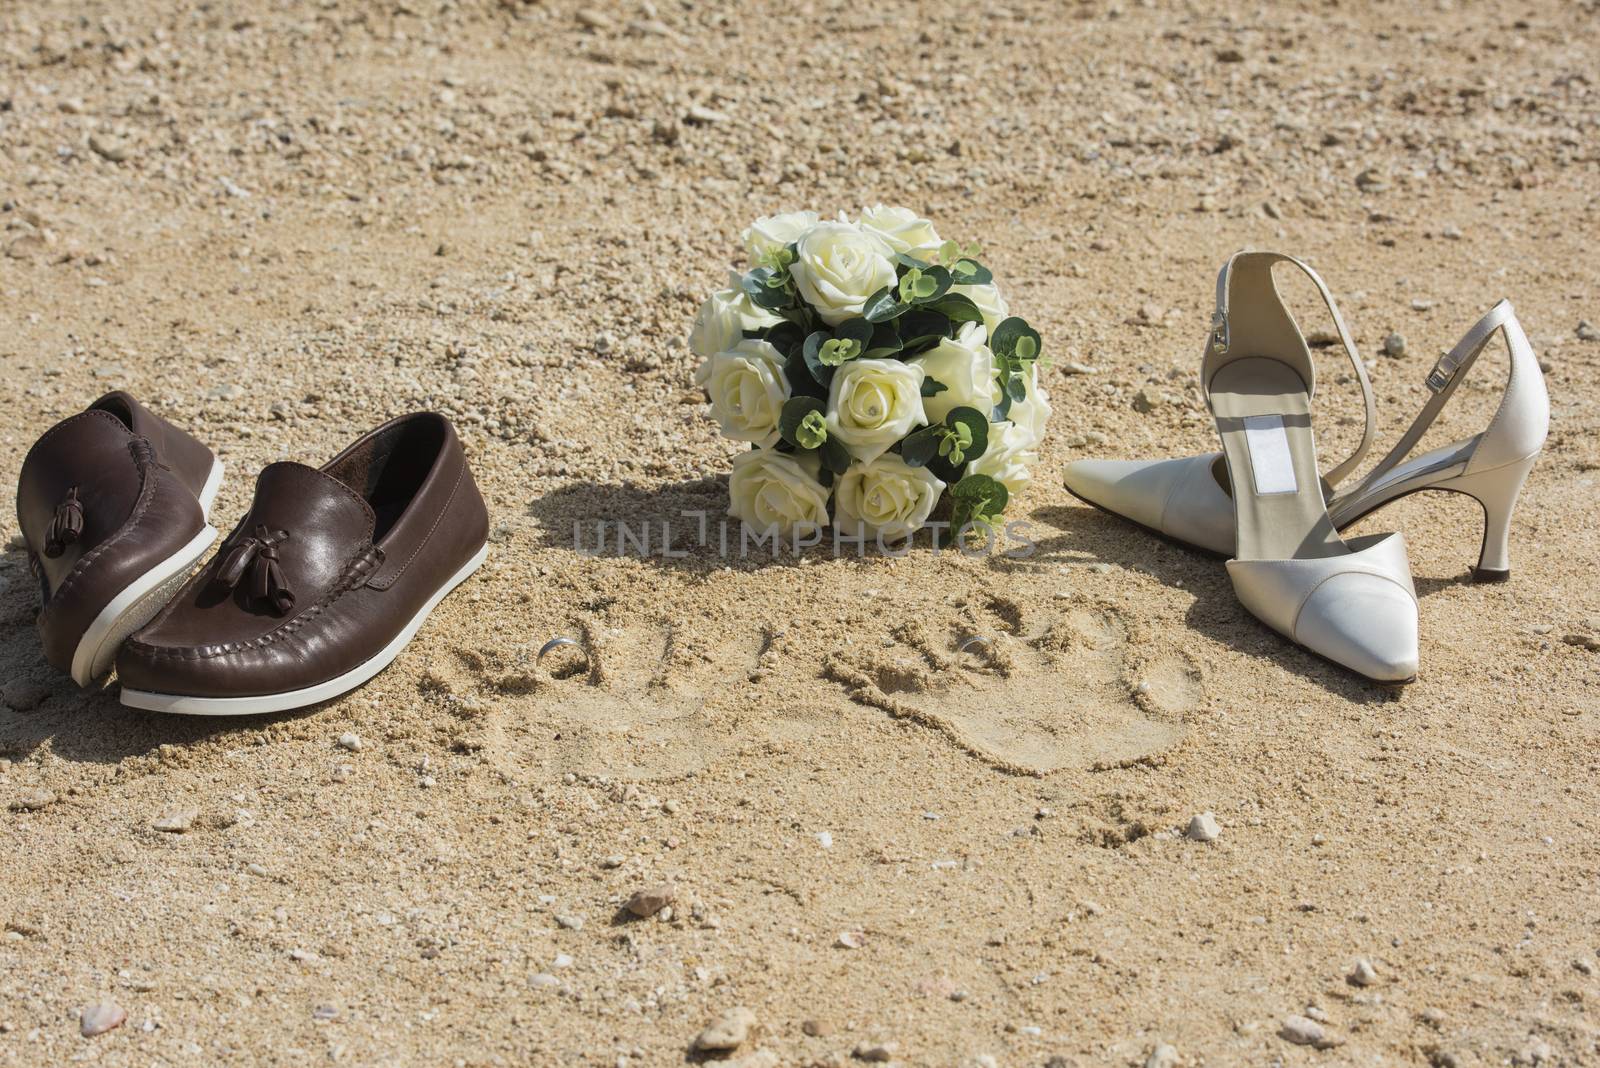 Beach wedding concept with shoes and rings in sand by paulvinten